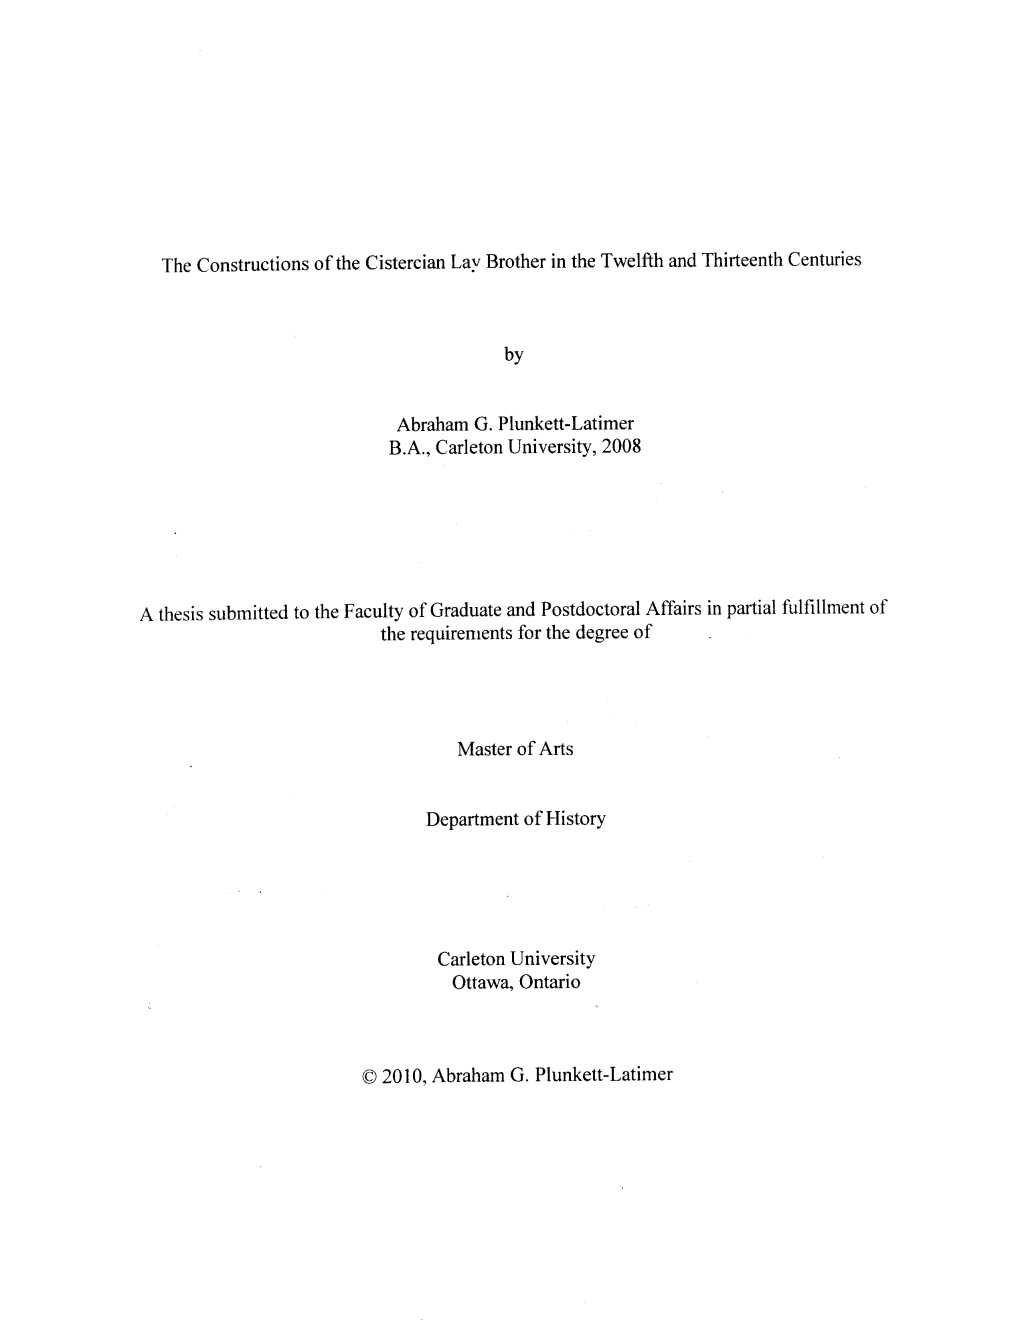 The Constructions Ofthe Cistercian Lay Brother in the Twelfth and Thirteenth Centuries